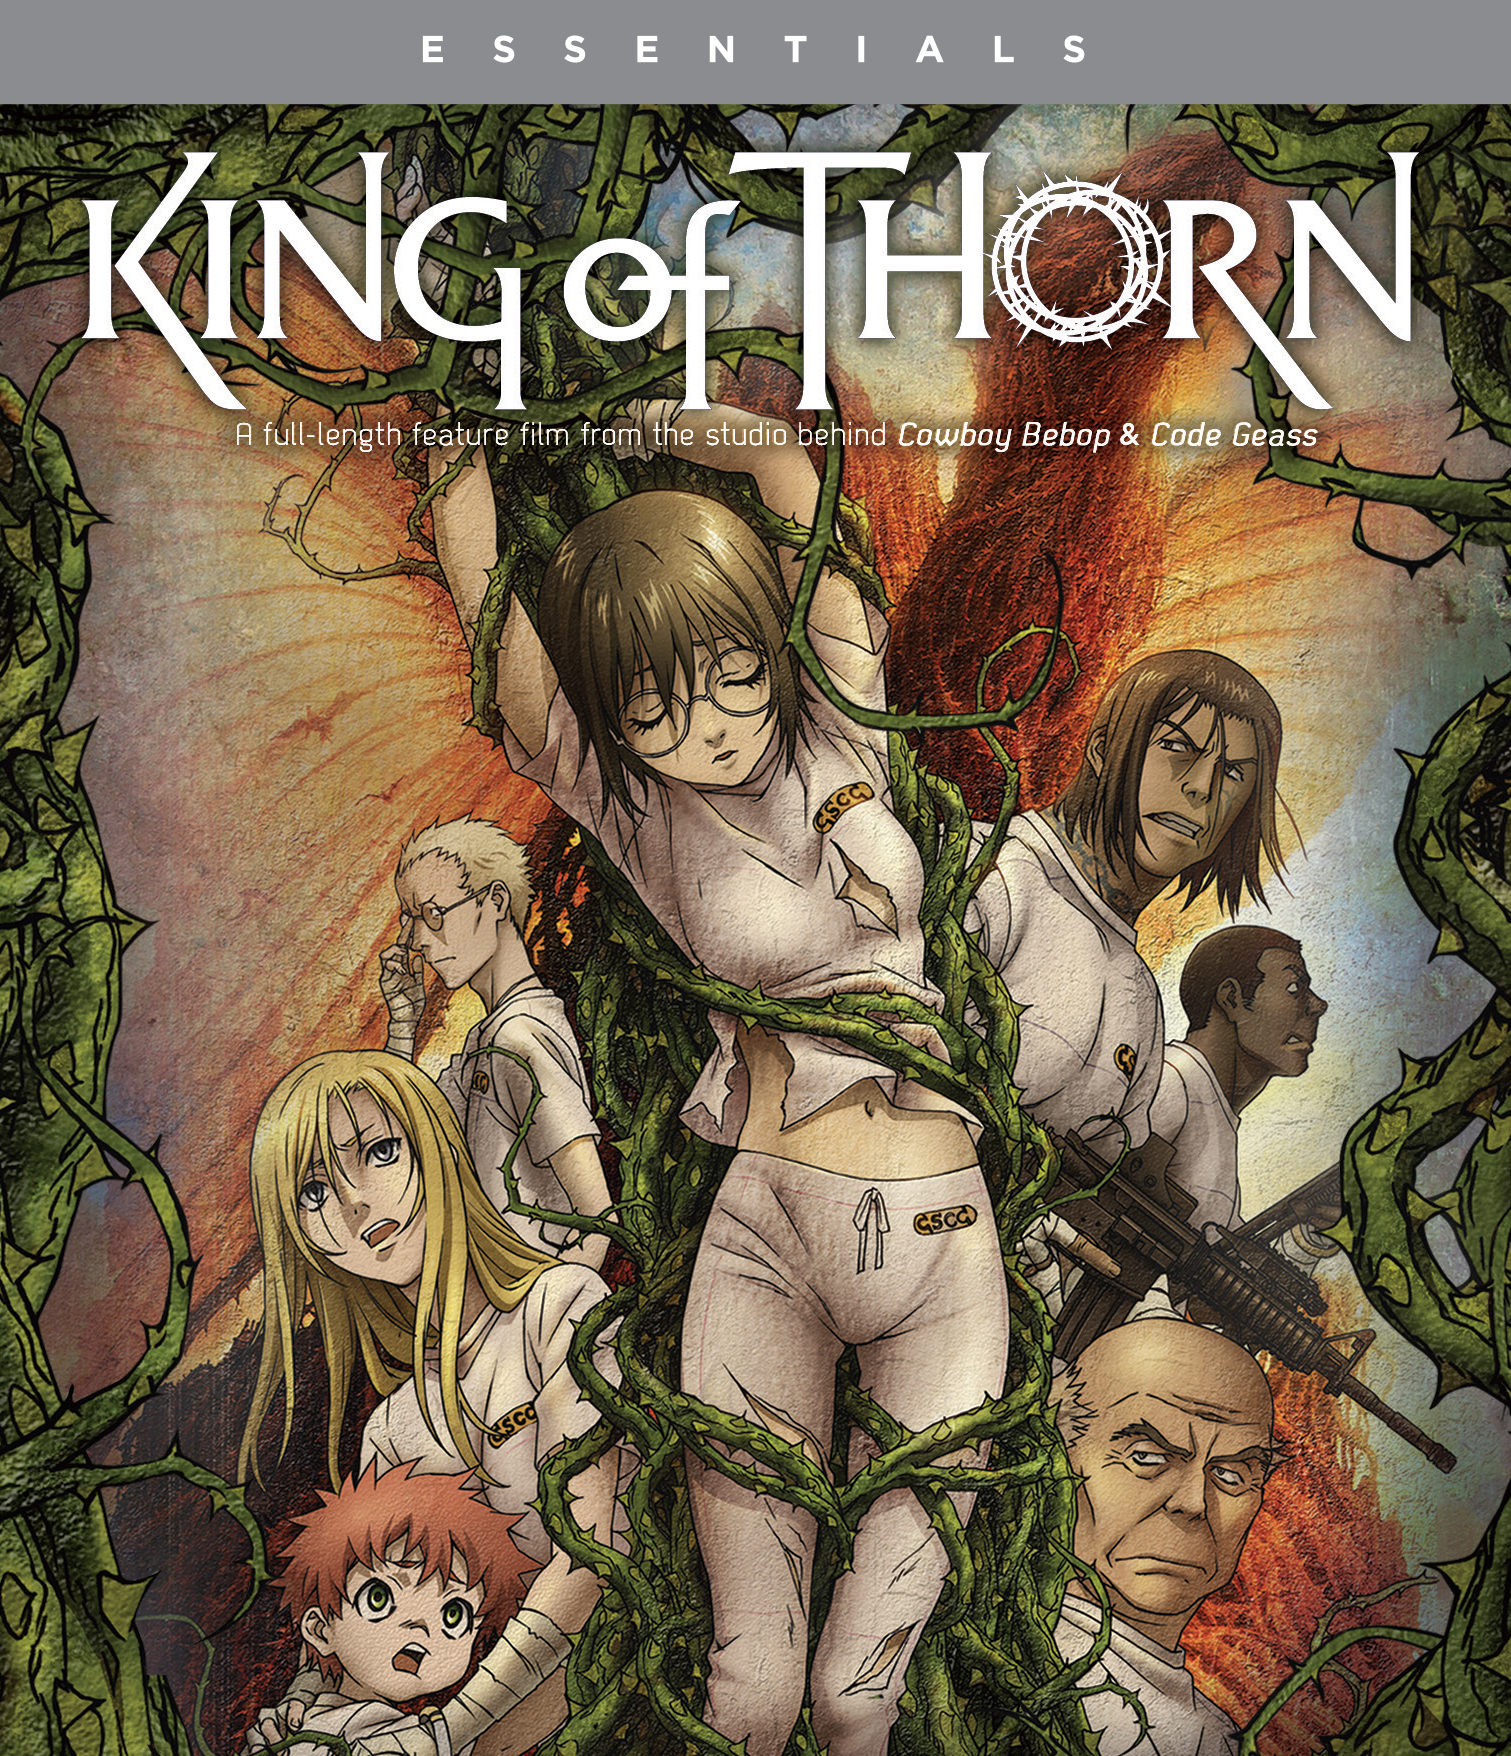 King of Thorn: The Movie [Blu-ray] [2010] - Best Buy